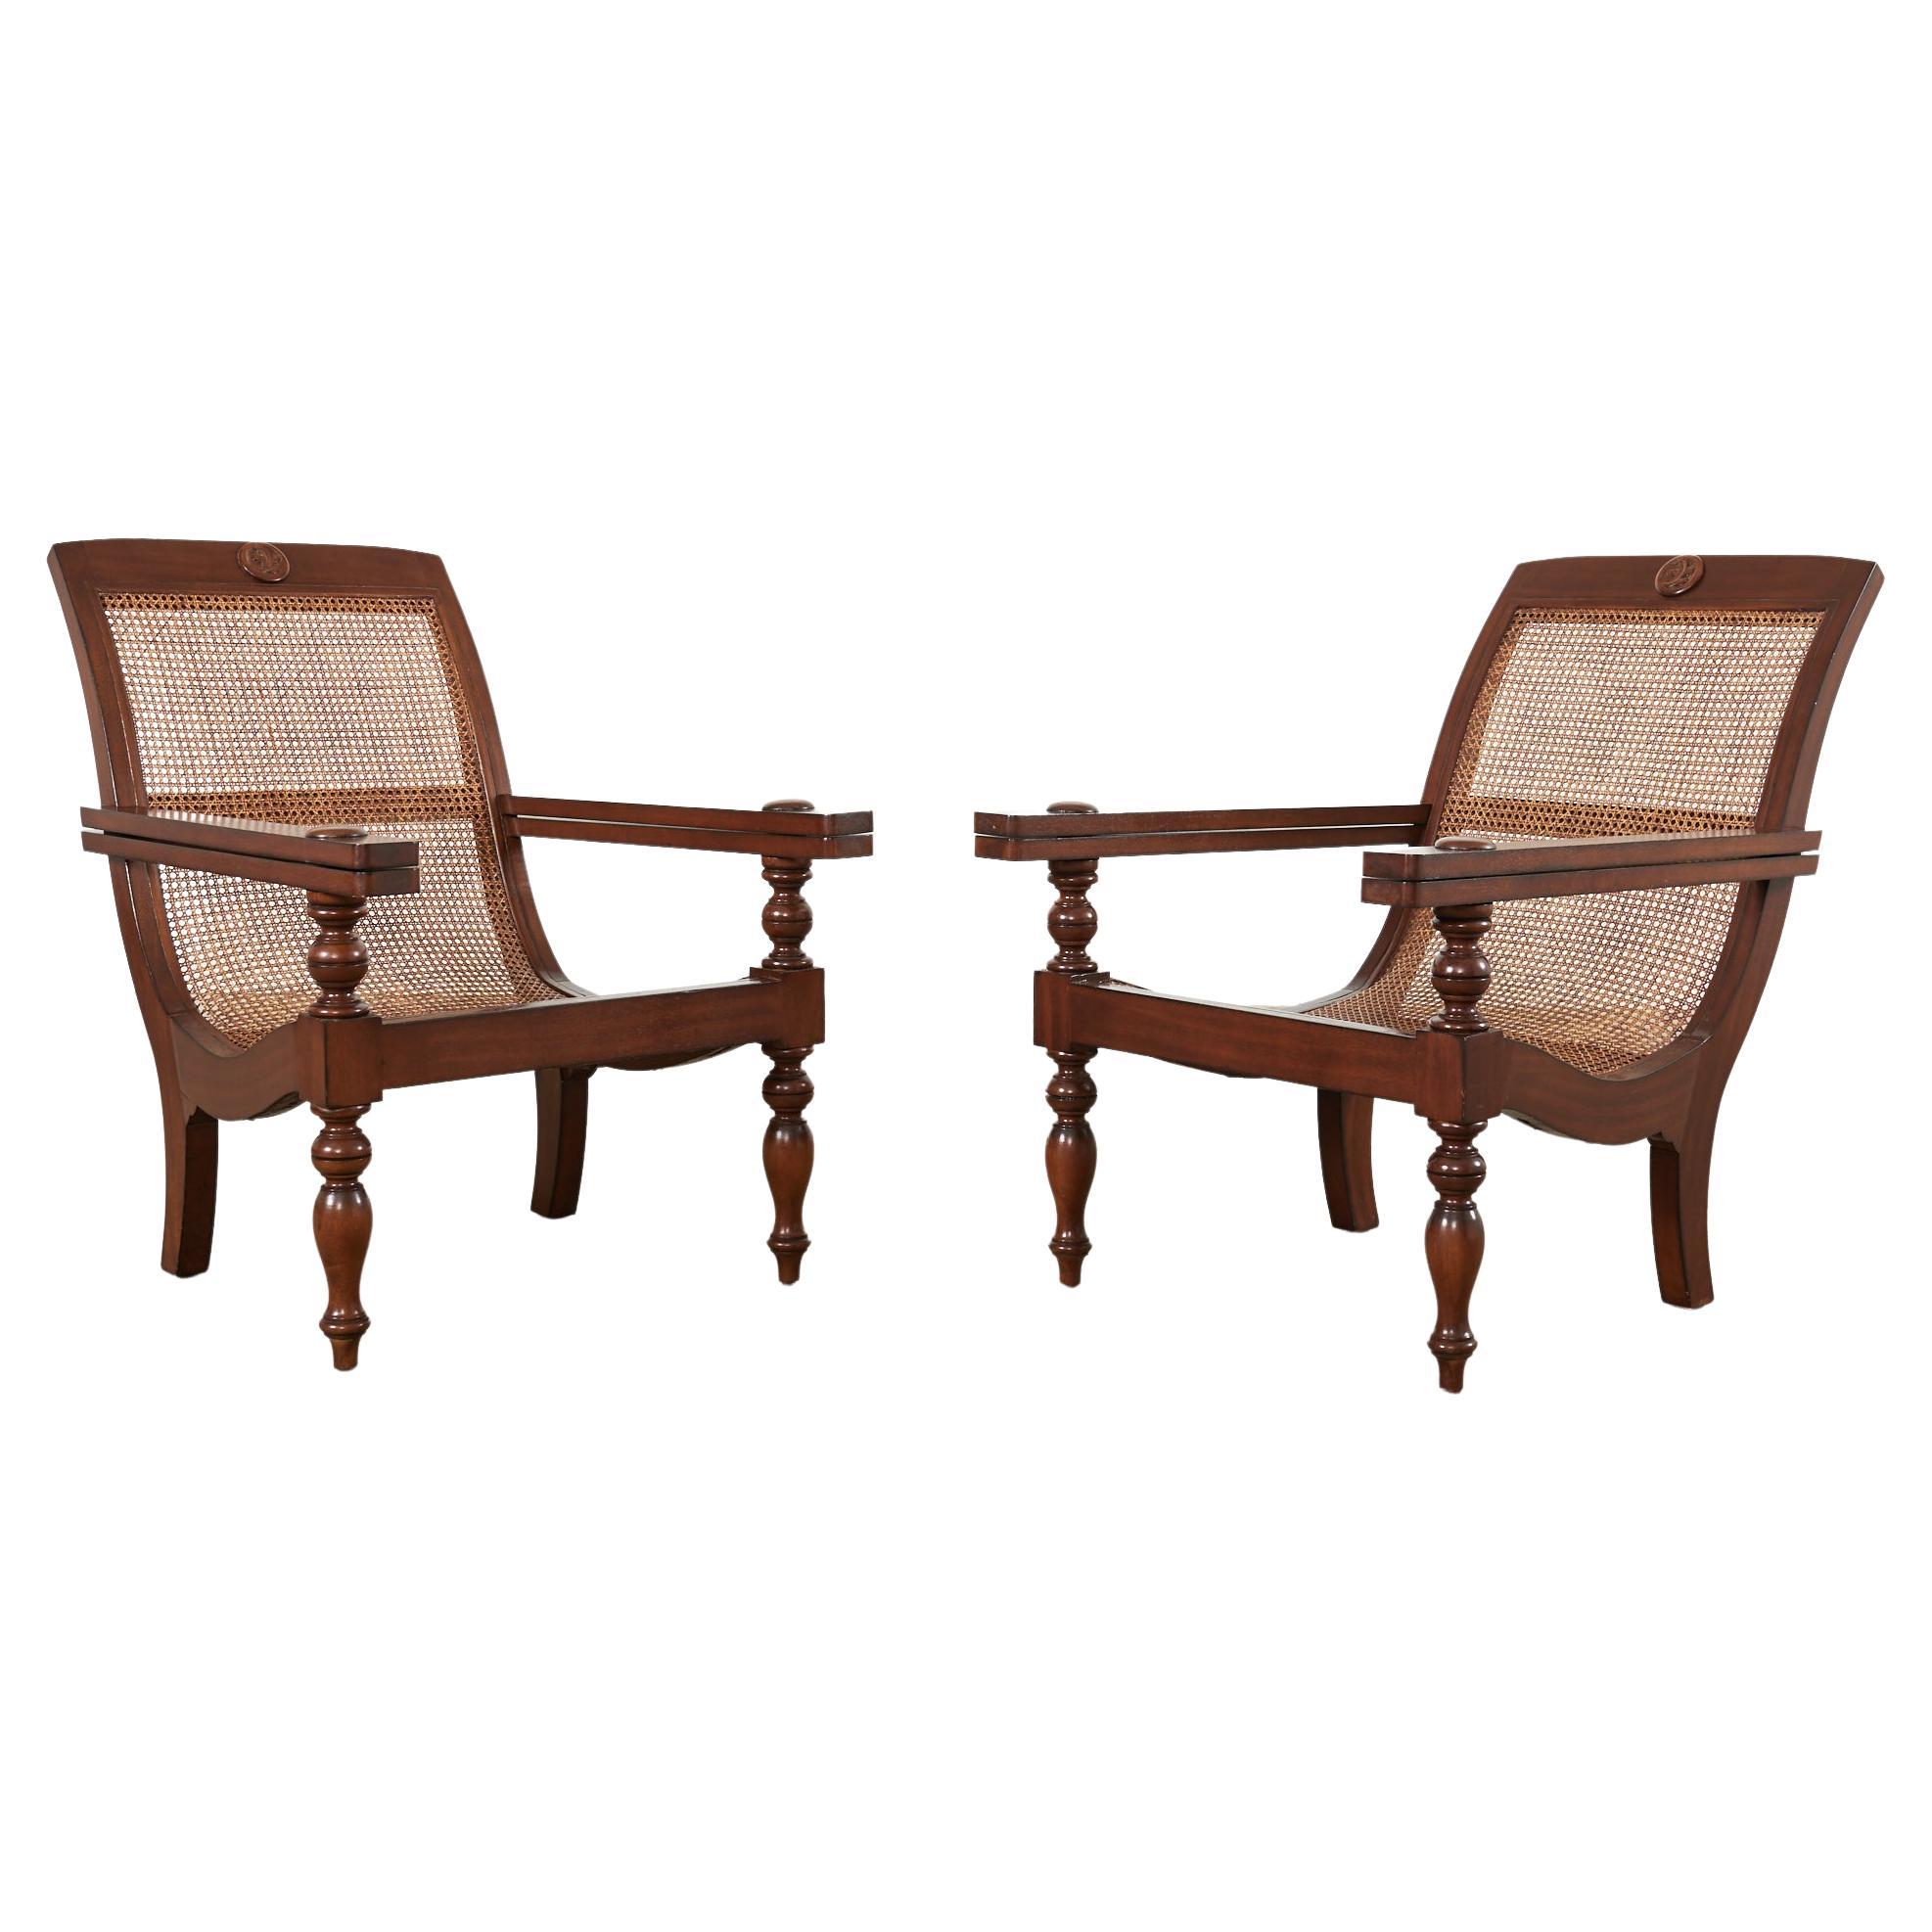 Pair of Dutch Colonial Style Mahogany Cane Plantation Chairs